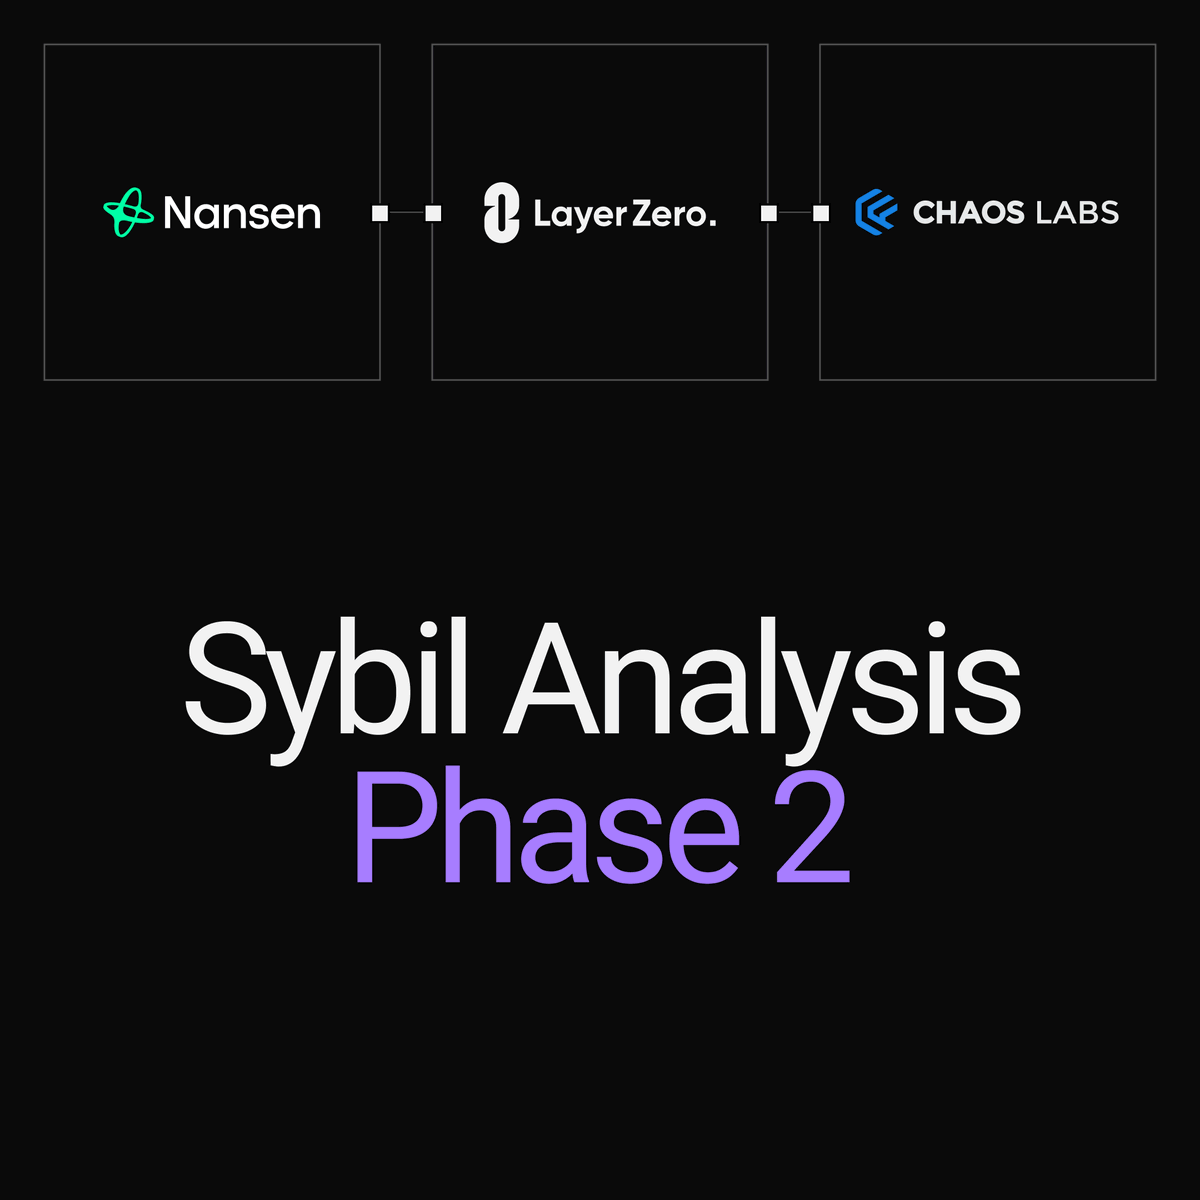 The sybil self-report phase has now concluded. Each self-reported address will receive 15% of its intended token allocation, with the remaining 85% returning to qualified users. Between the sybil self-report and analysis by LayerZero, @chaos_labs, and @nansen_ai, 803,093